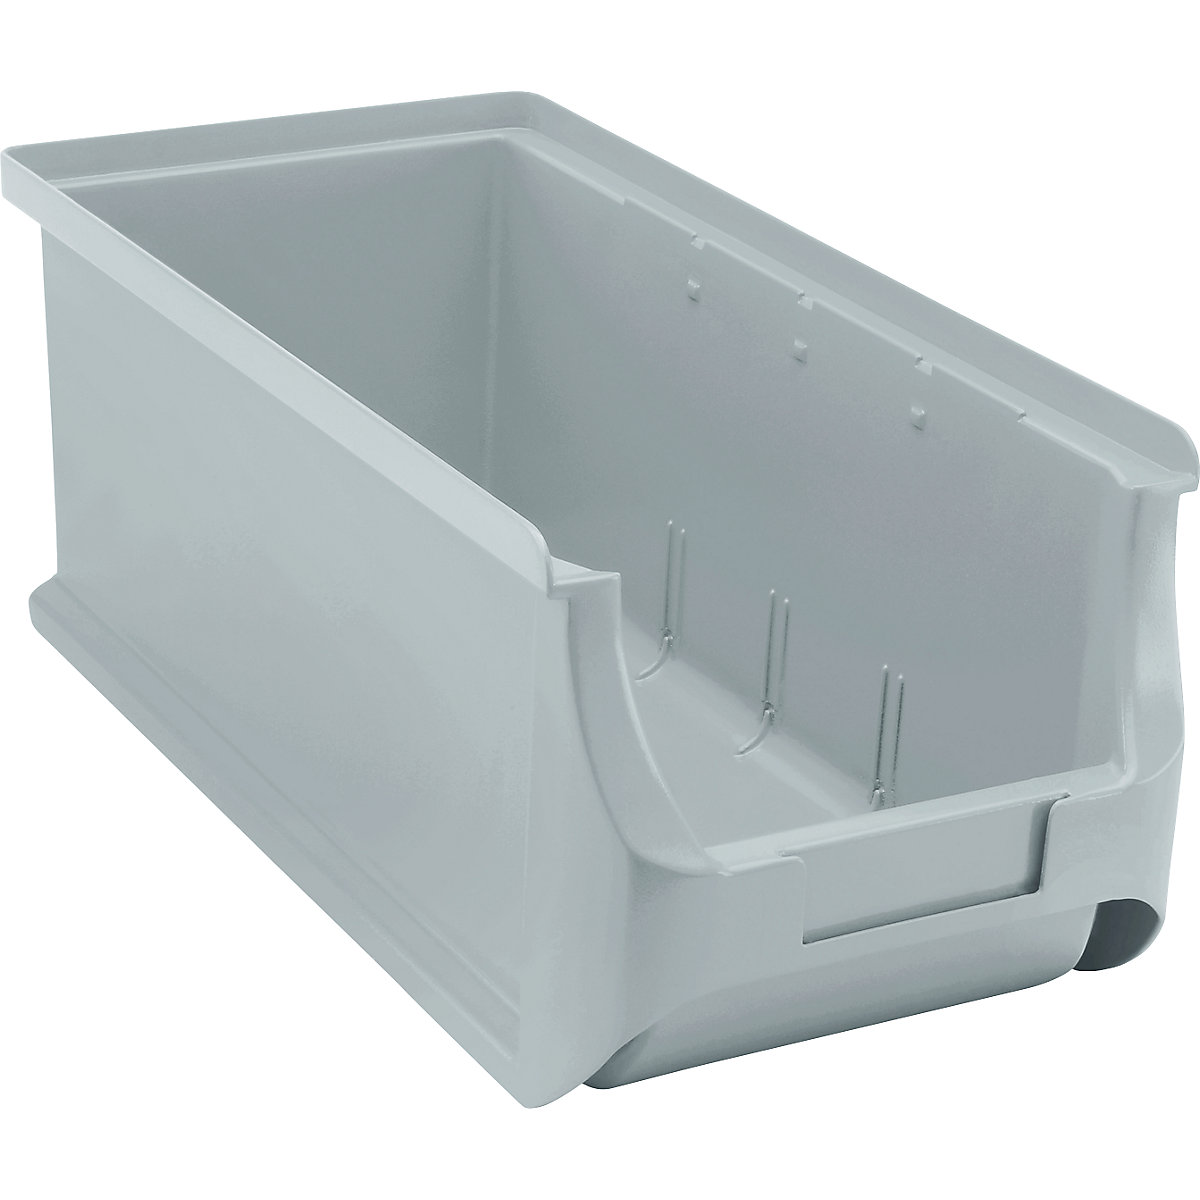 Open fronted storage bin, LxWxH 320 x 150 x 125 mm, pack of 18, grey-6